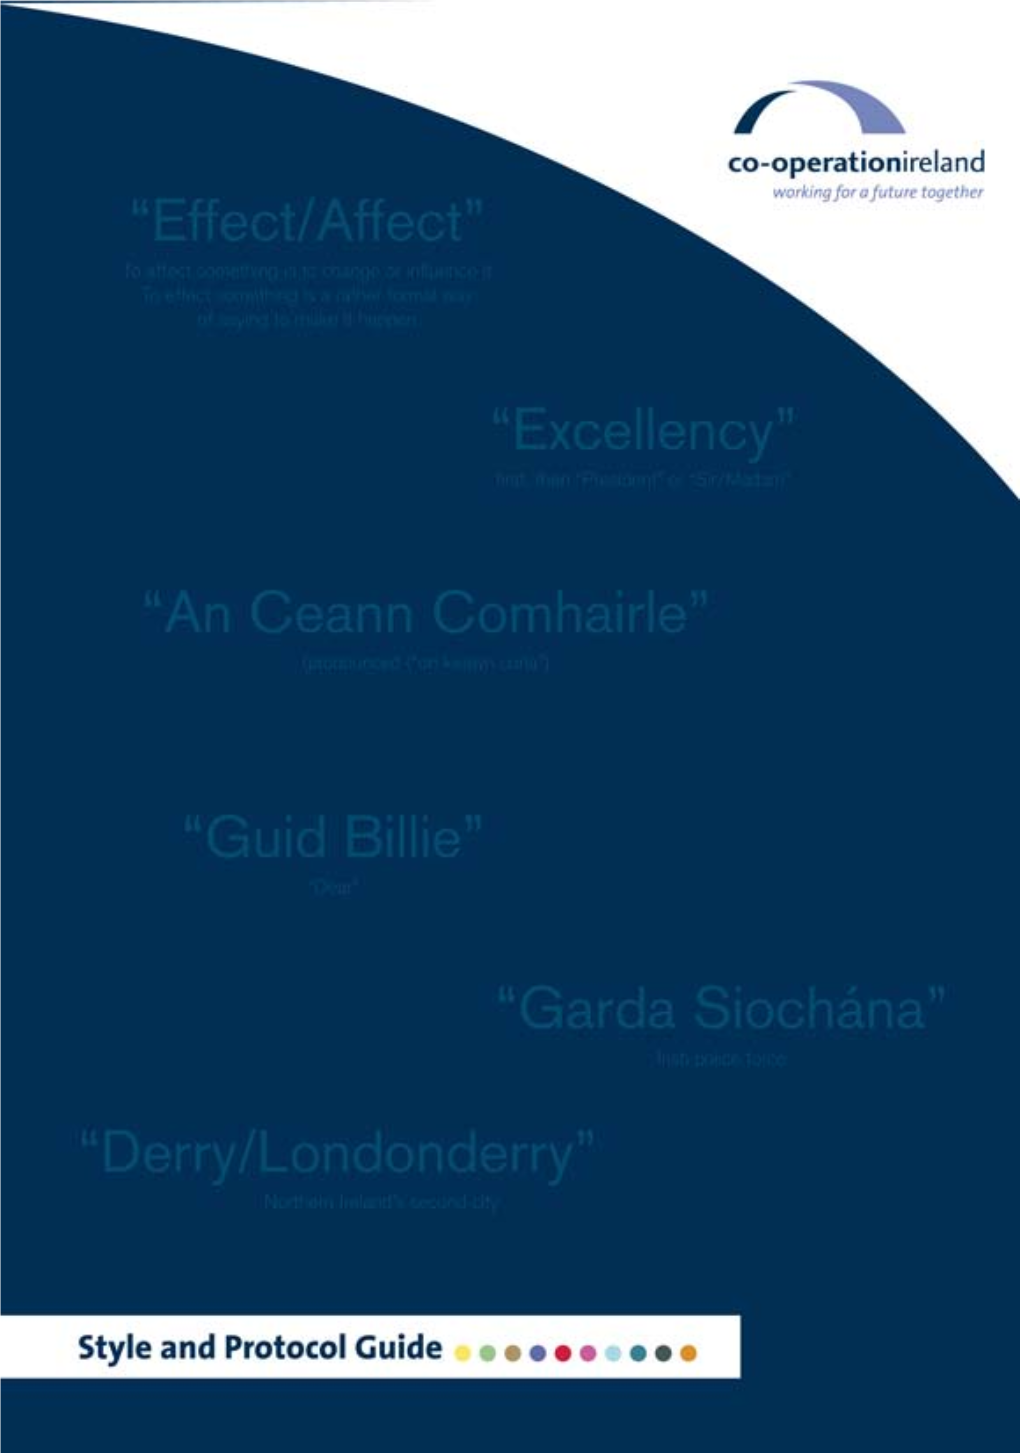 Co-Operation Ireland's Style and Protocol Guide Download